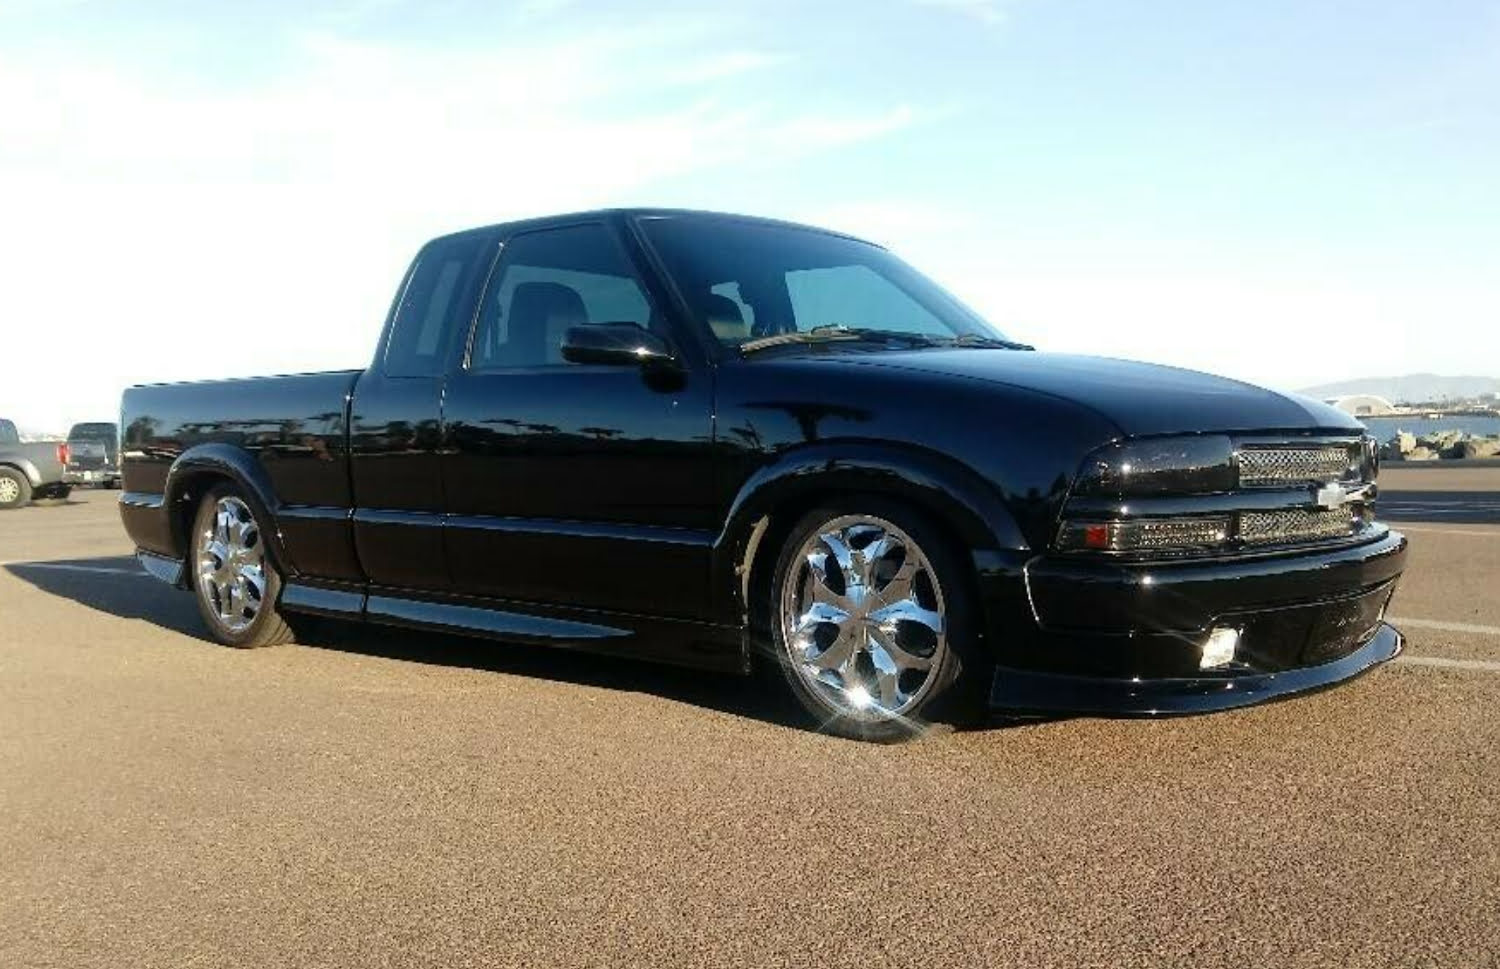 This Custom 2000 Chevy S10 Xtreme Is Up For Sale | GM Authority